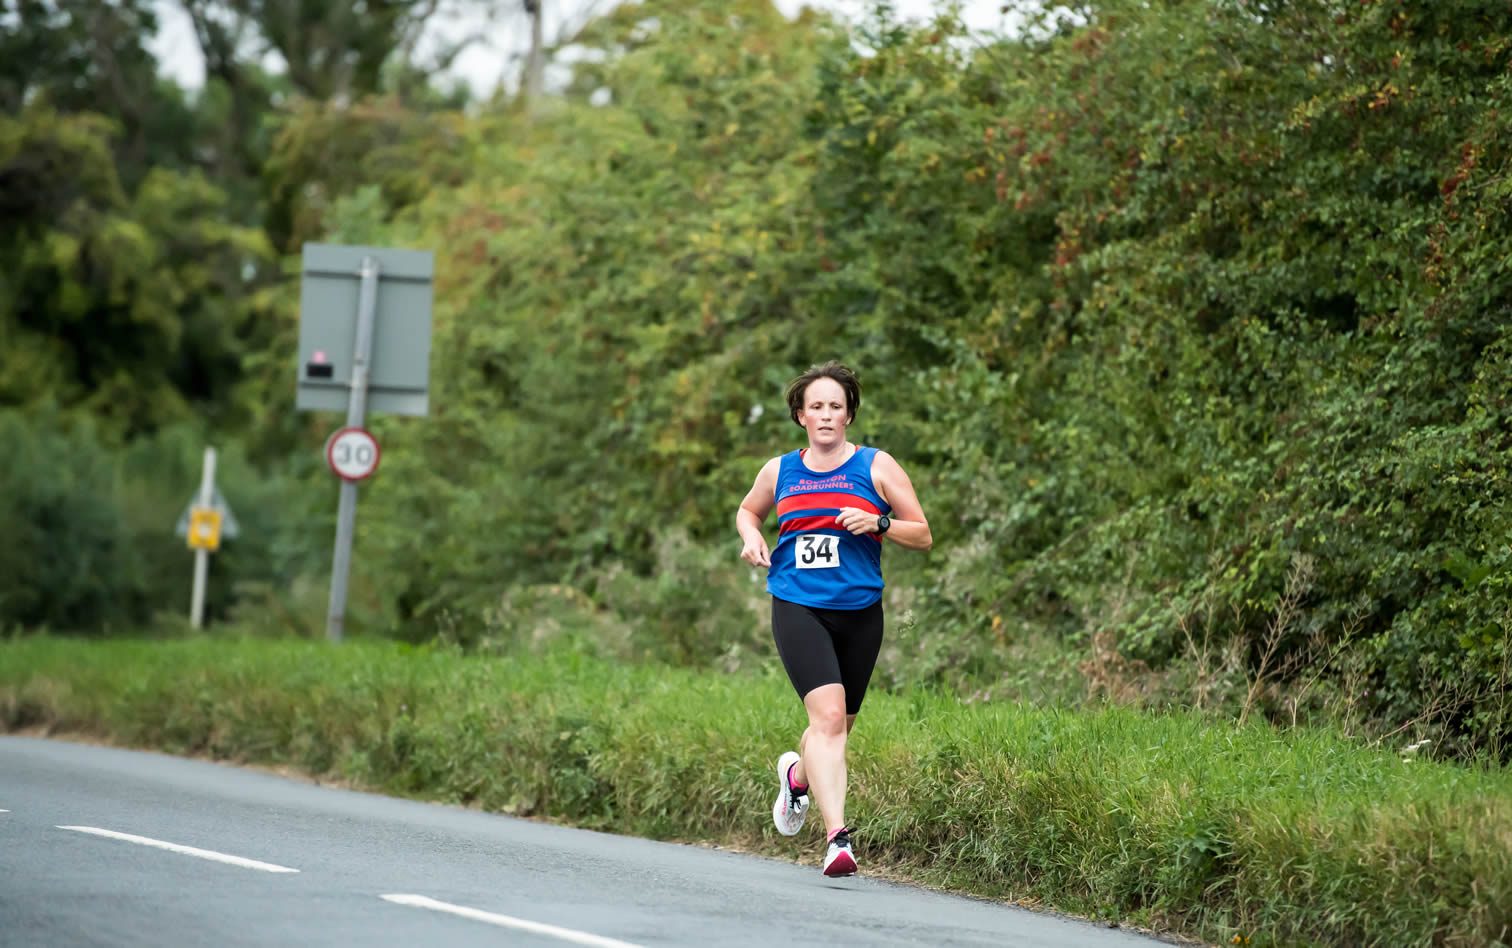 Bourton's Maxine Emes at Haresfield 5k, 300m to go - 17th August 2022